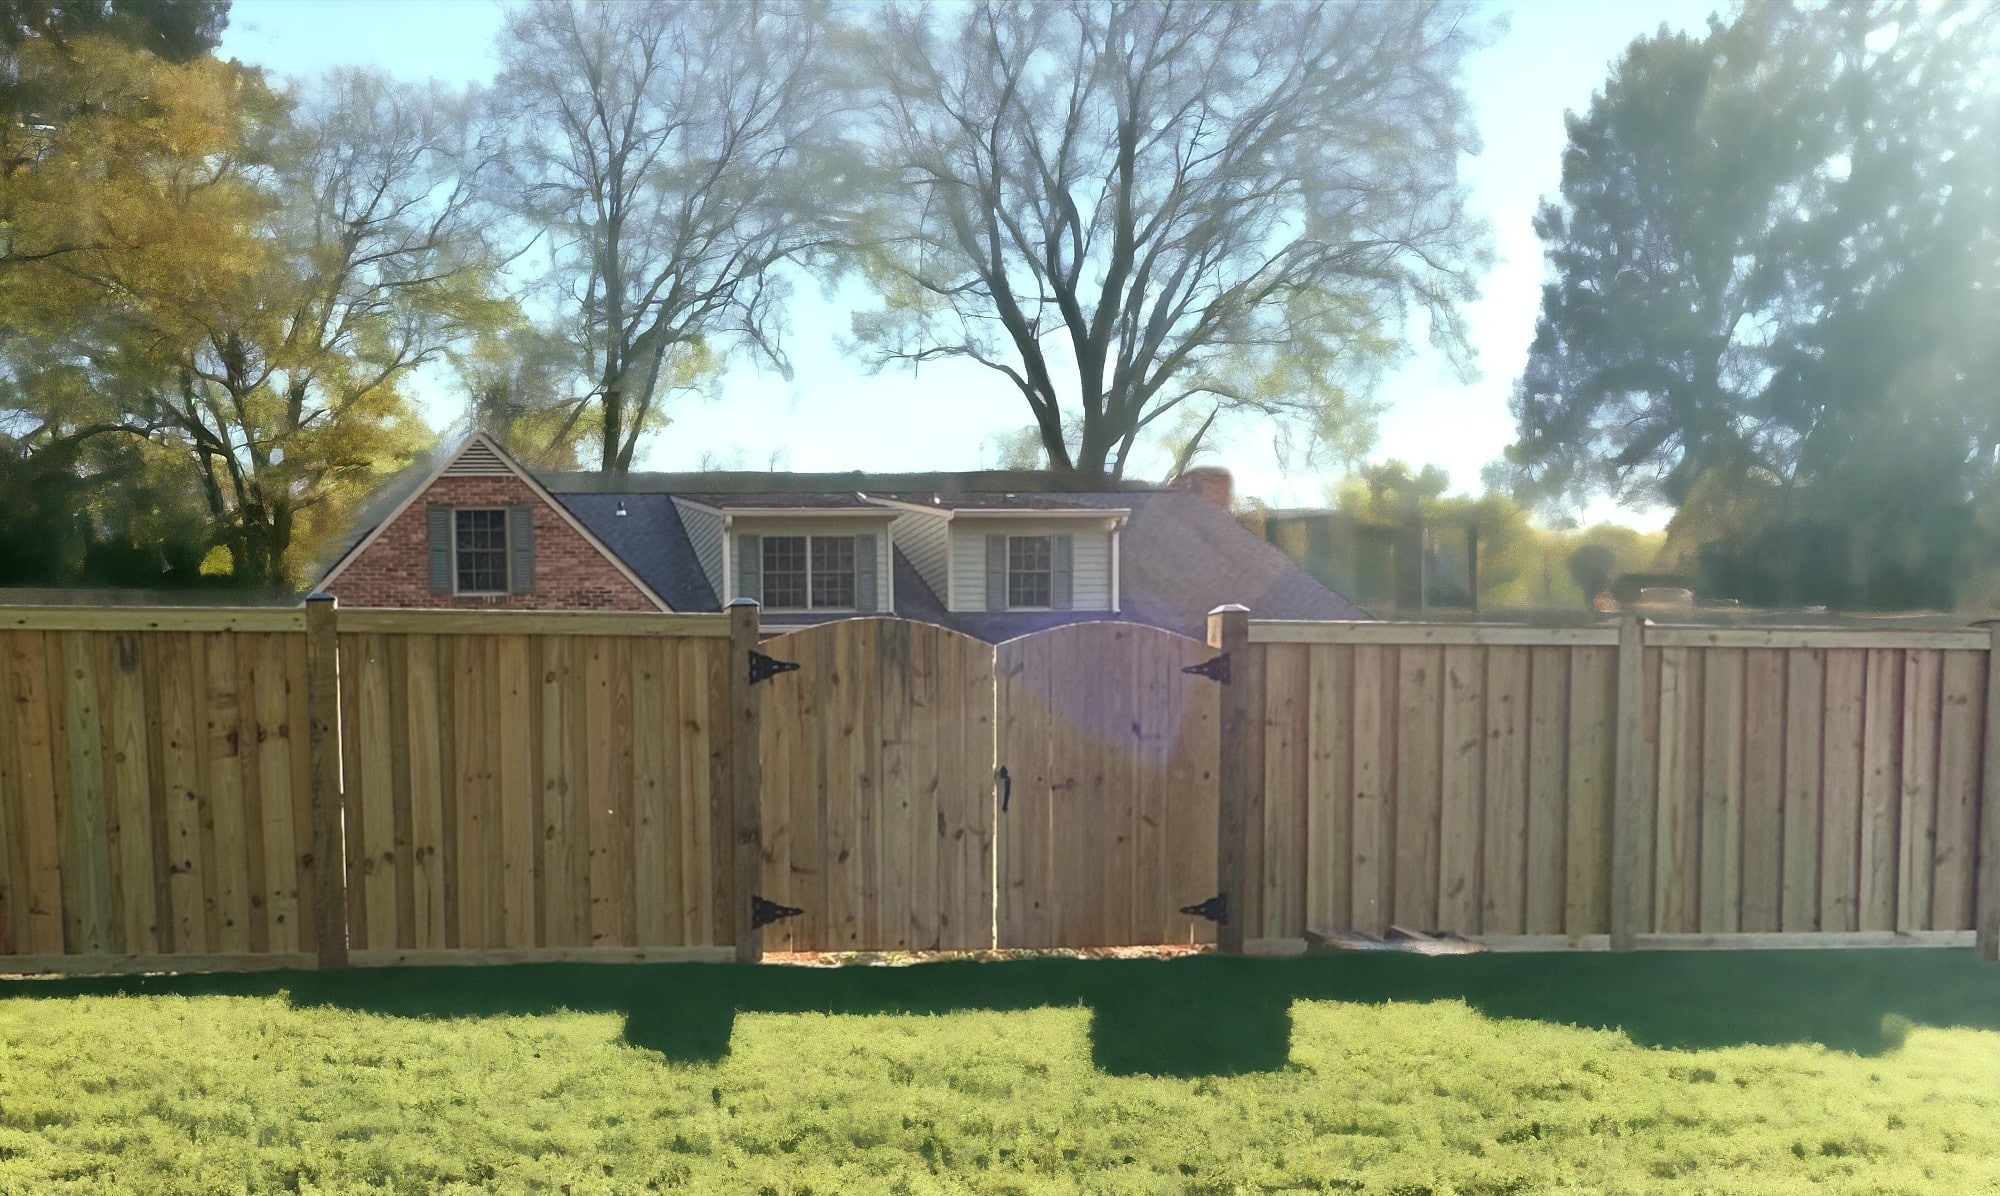 New wooden privacy fence with arched double gate opening in a residential backyard, with construction materials scattered on the ground, houses and trees in the background, and sunlight peeking through the foliage.